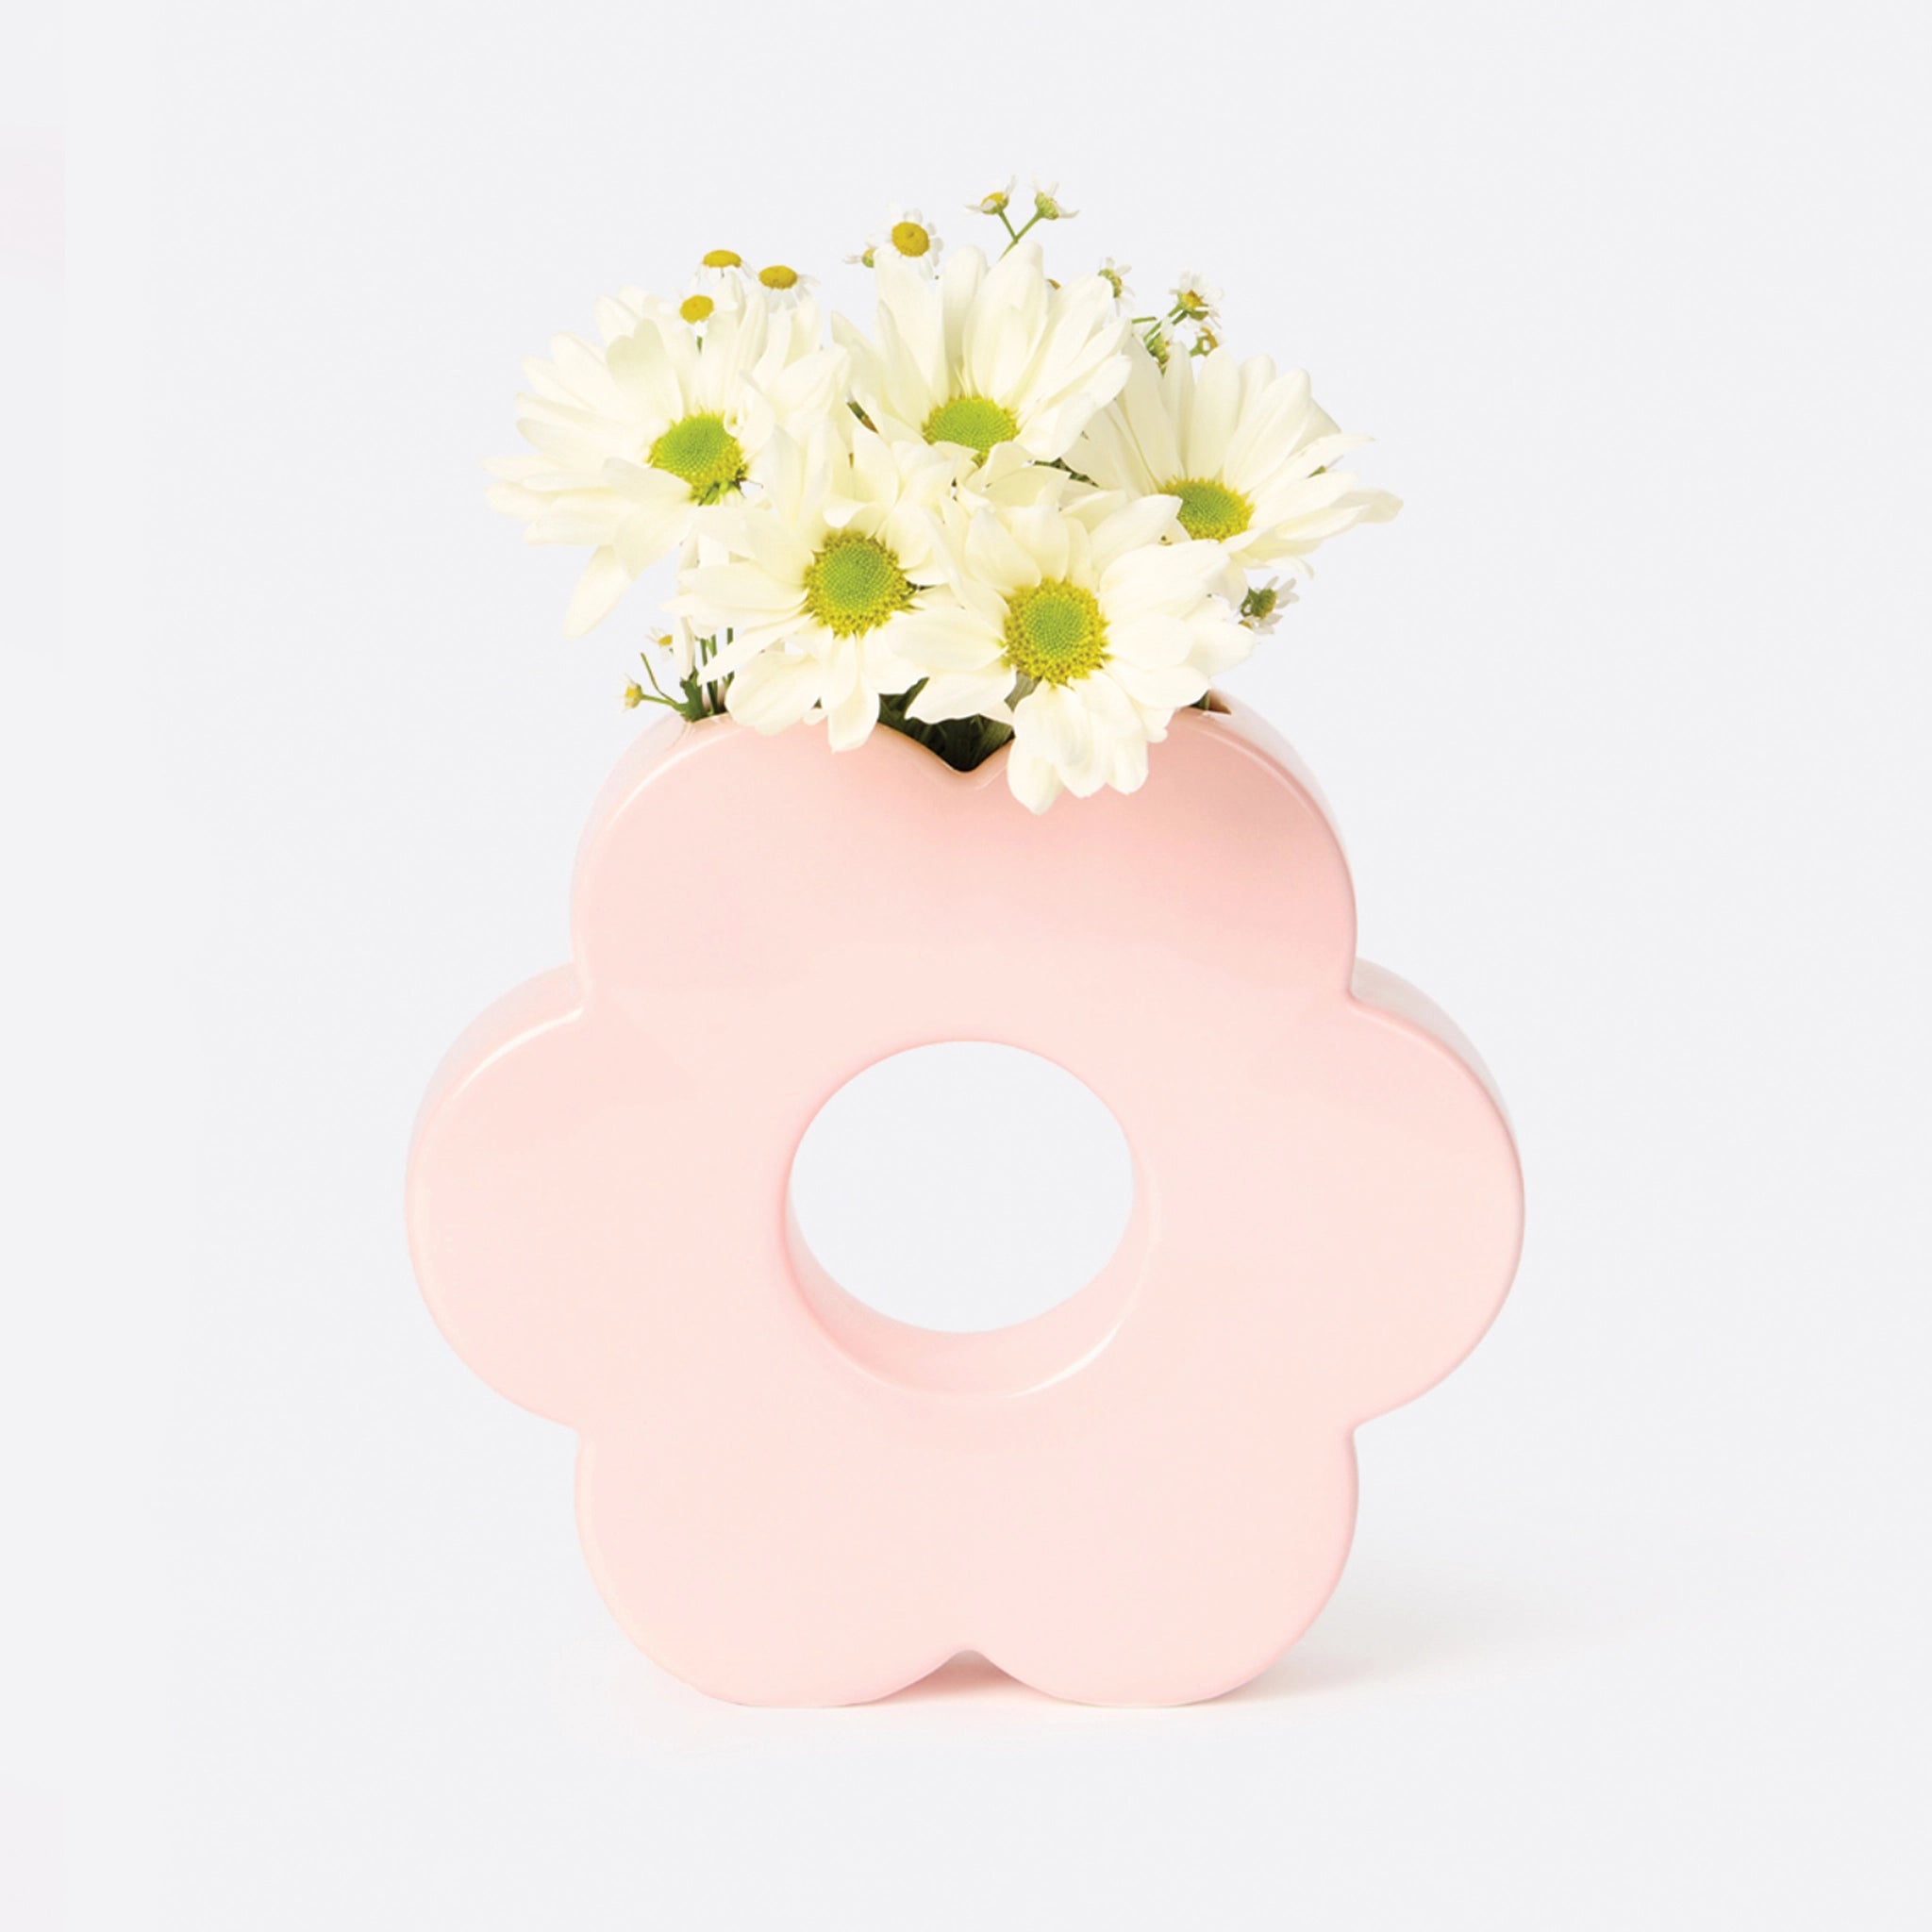 A light pink ceramic vase in the shape of a daisy with an opening in the center and an opening at the top to insert plants and floral stems.